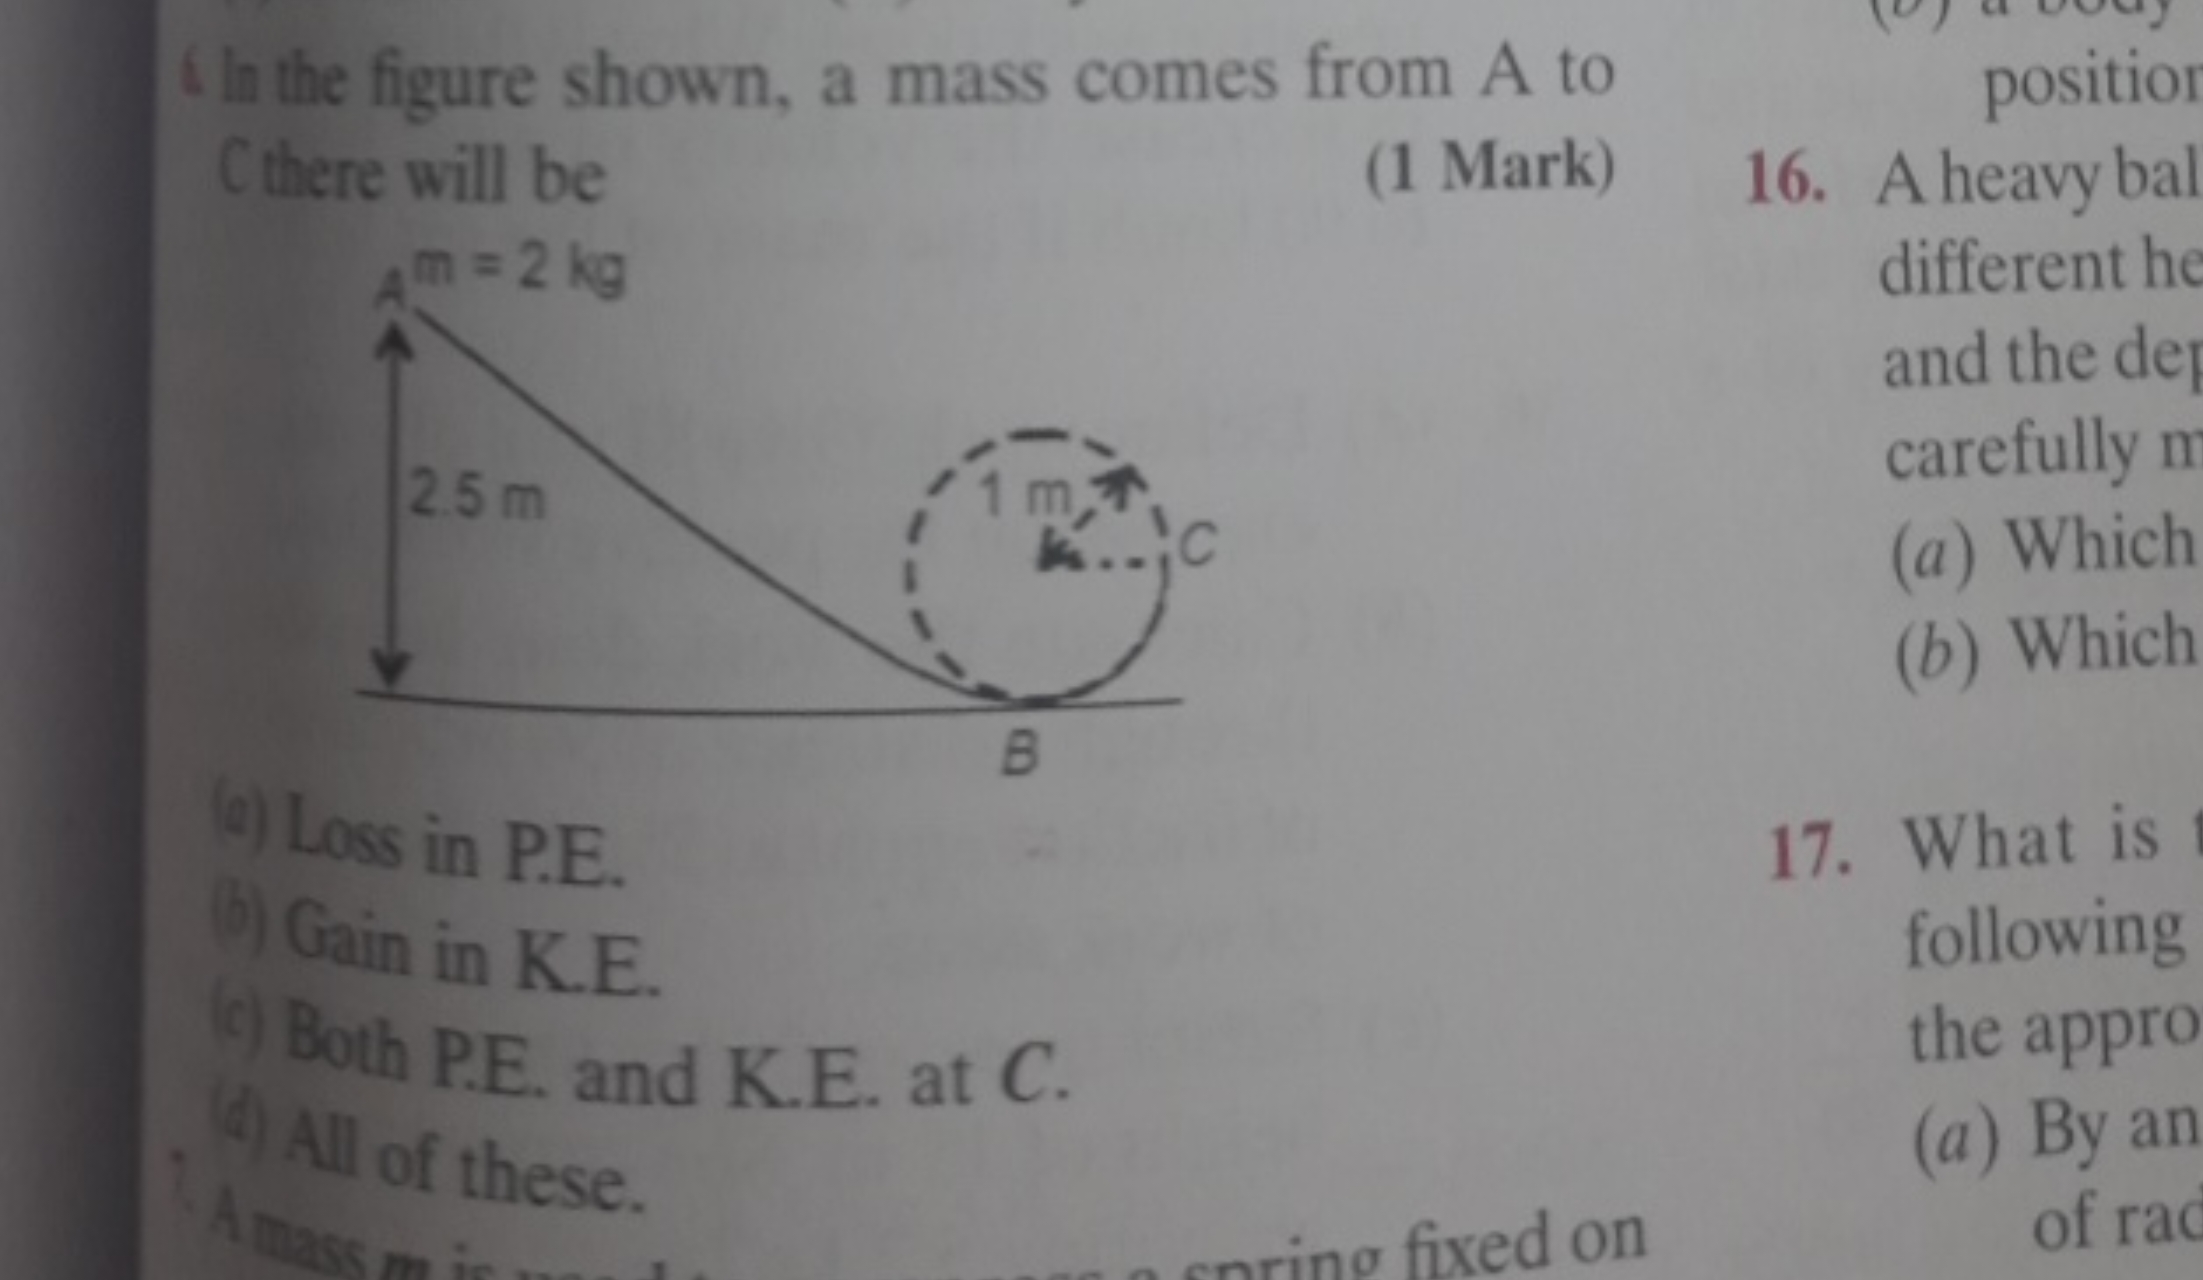 t In the figure shown, a mass comes from A to
cthere will be
(1 Mark)
